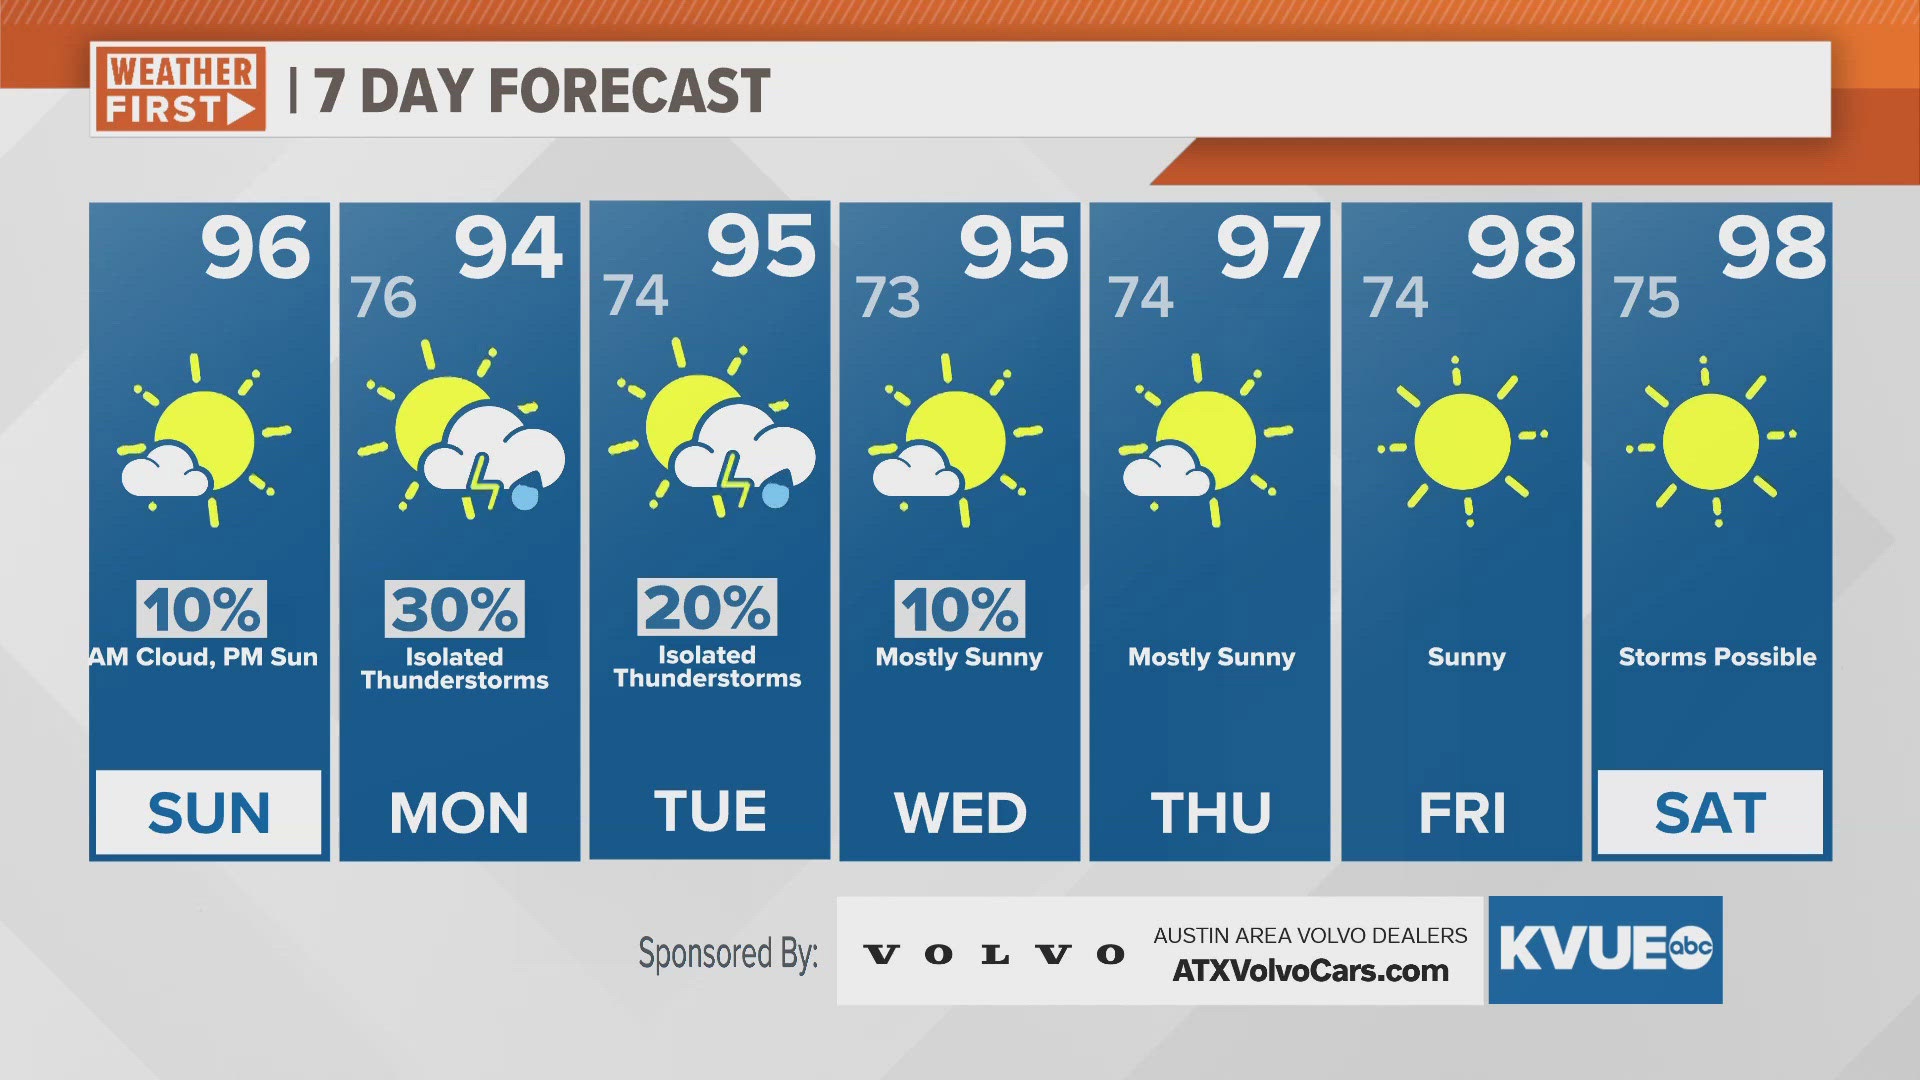 Rain chances return Monday and Tuesday. Hot and humid otherwise.